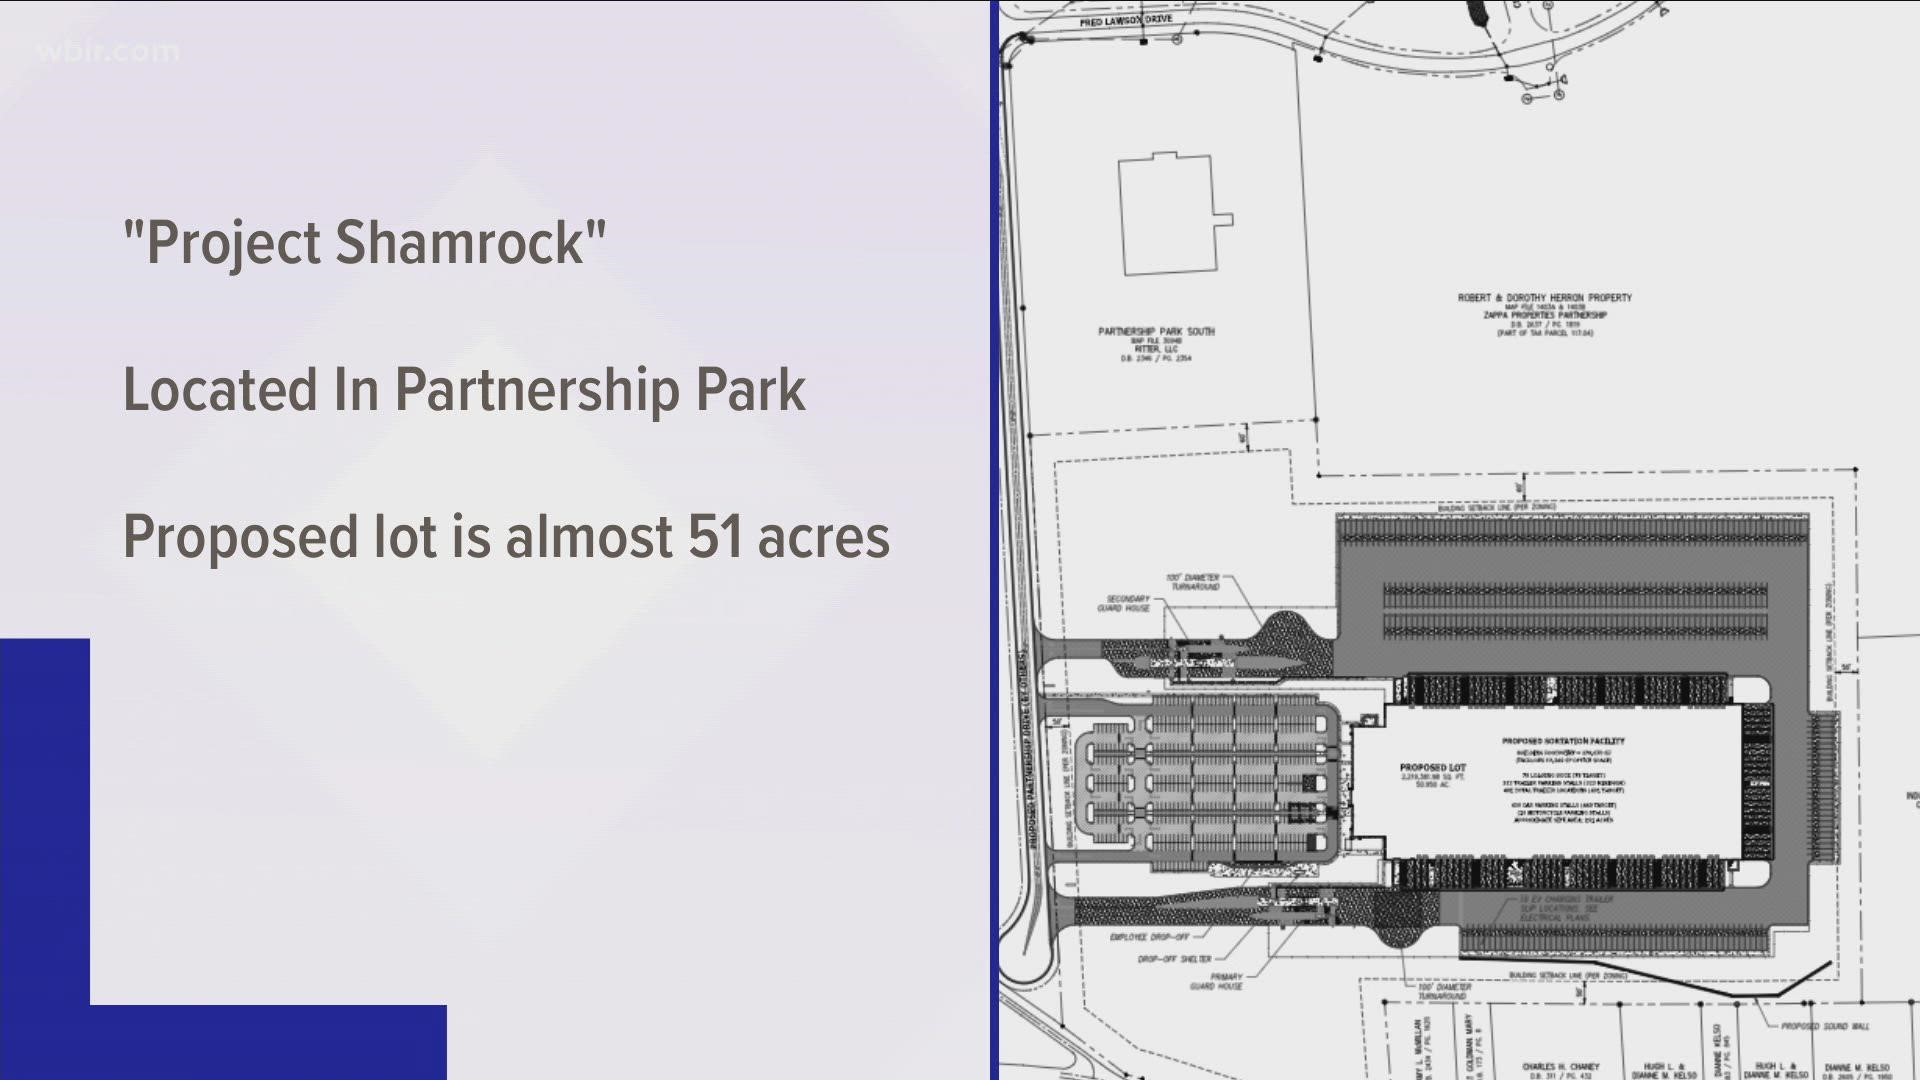 Documents reveal plans to build an expansive "sortation facility" in an area of Maryville known as Partnership Park South.